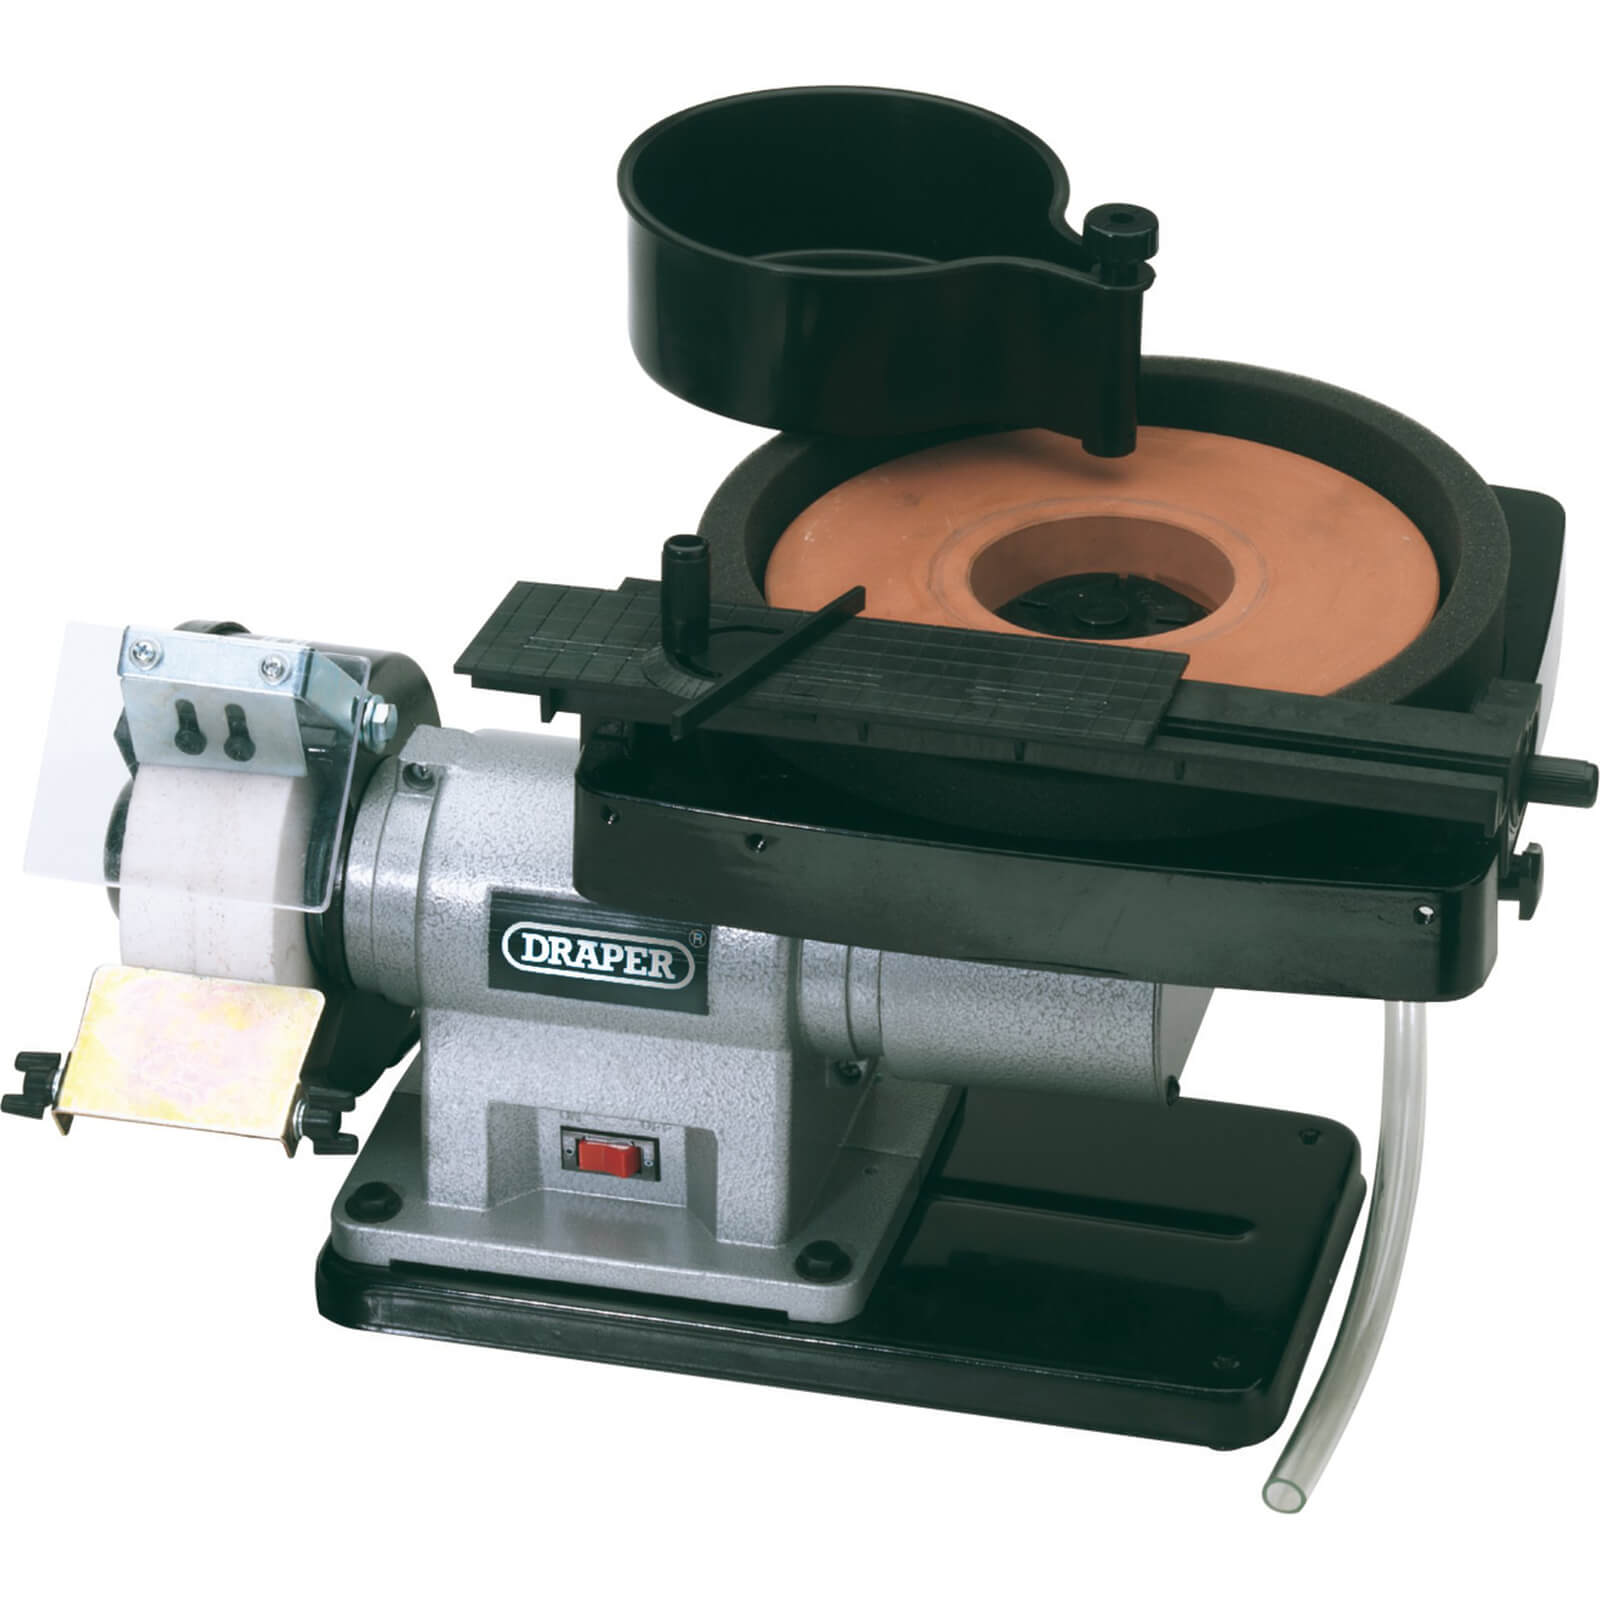 Photo of Draper Gwd205a Wet And Dry Bench Grinder 240v